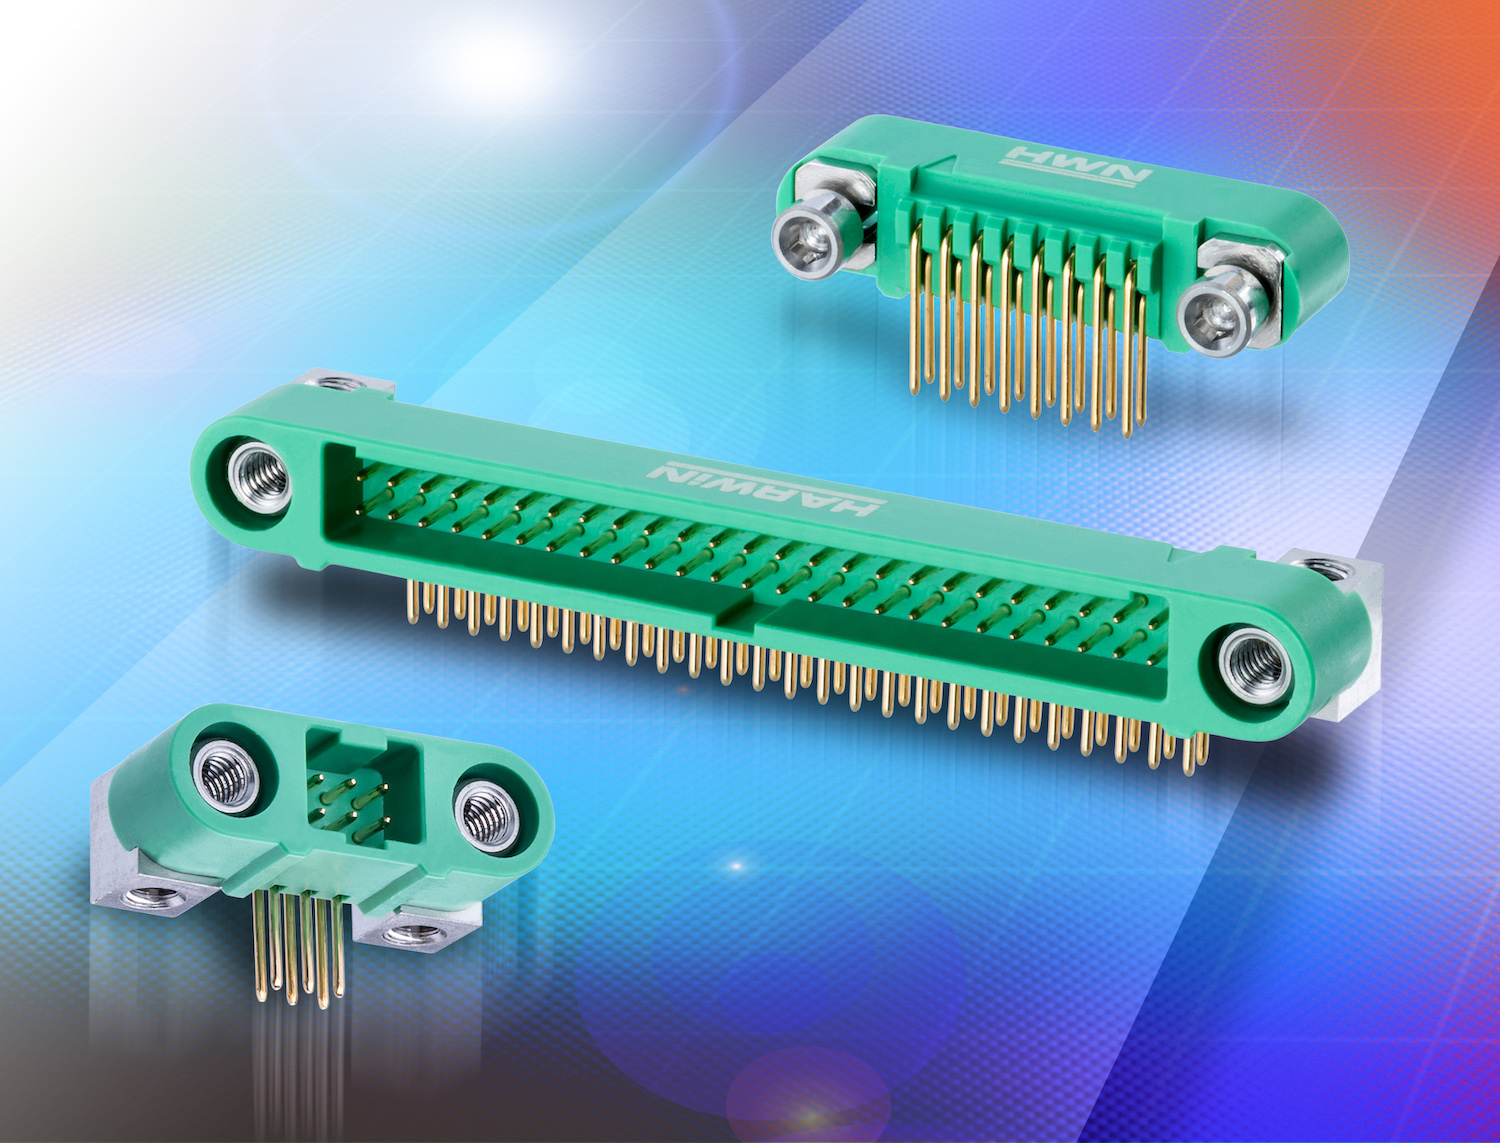 space-grade connectors from Harwin